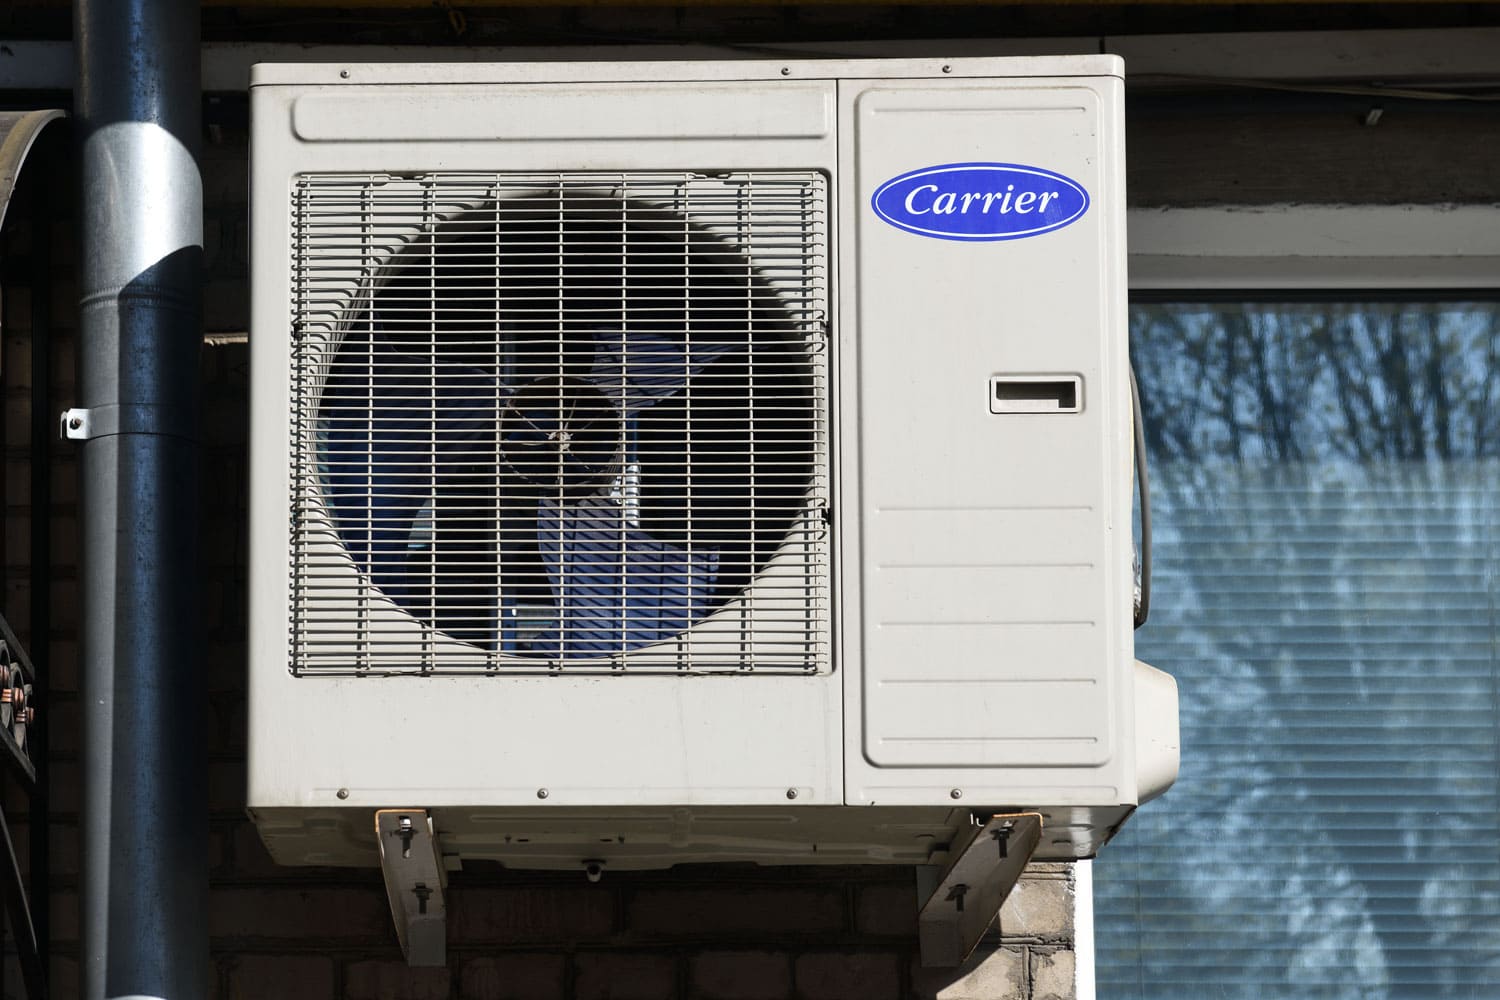 A carrier air conditioning unit mounted on reinforced brackets